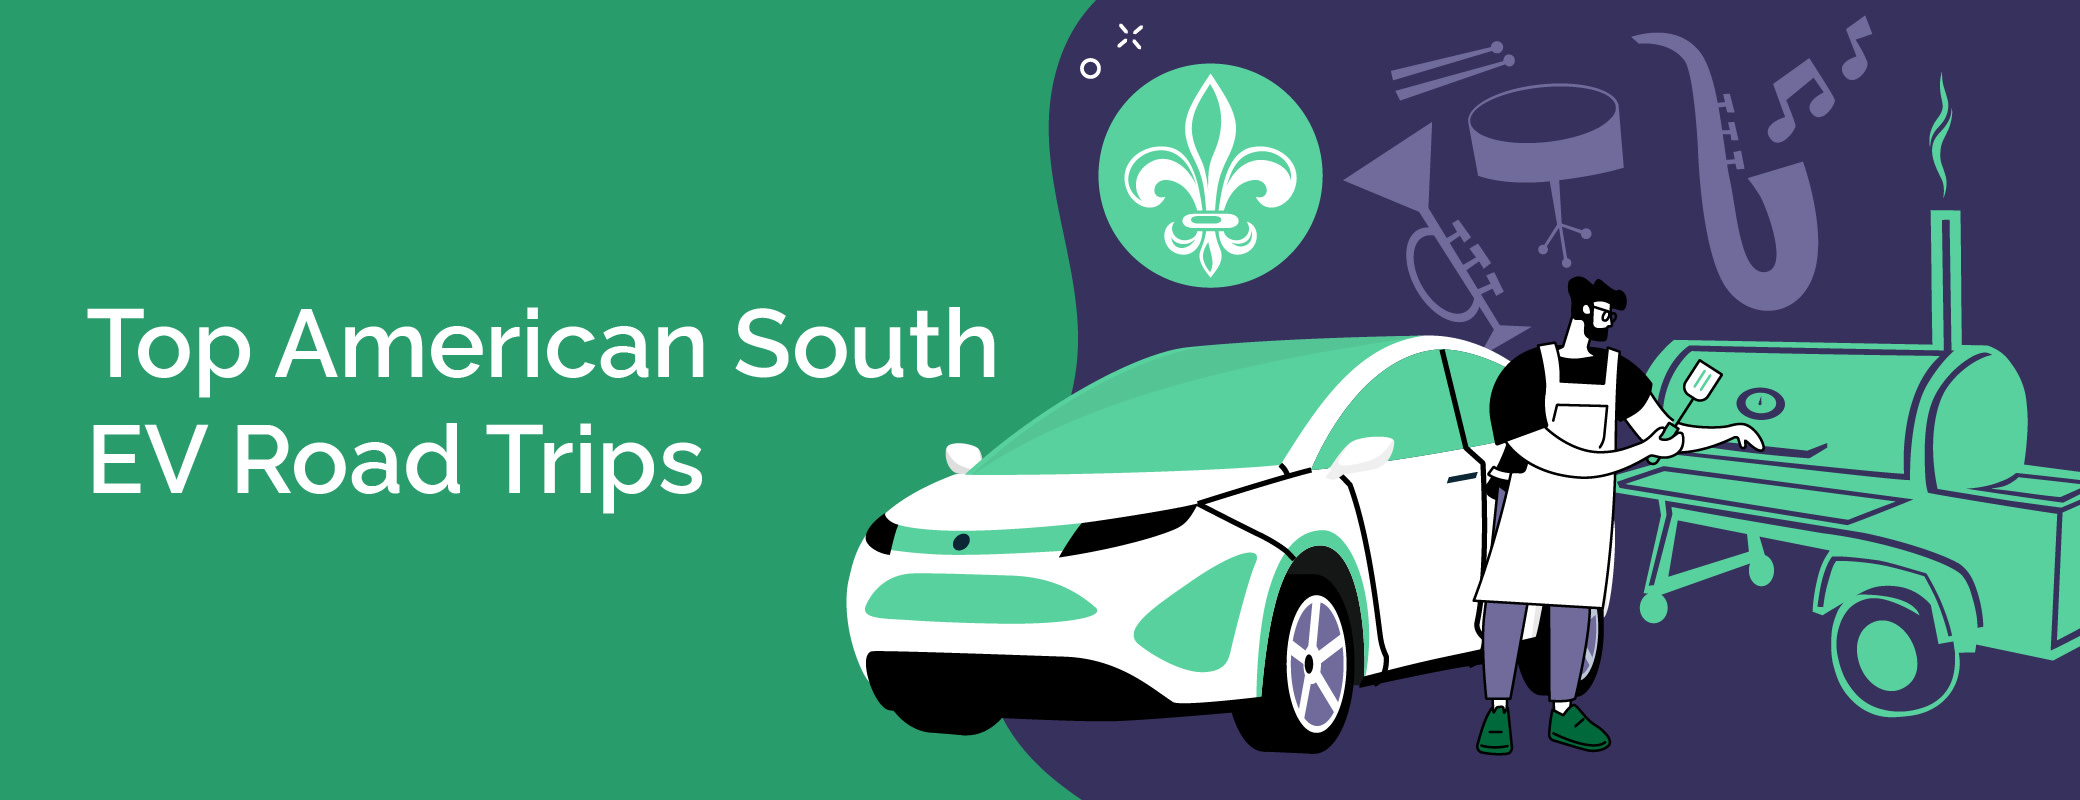 Top Road Trips for Electric Vehicles American South